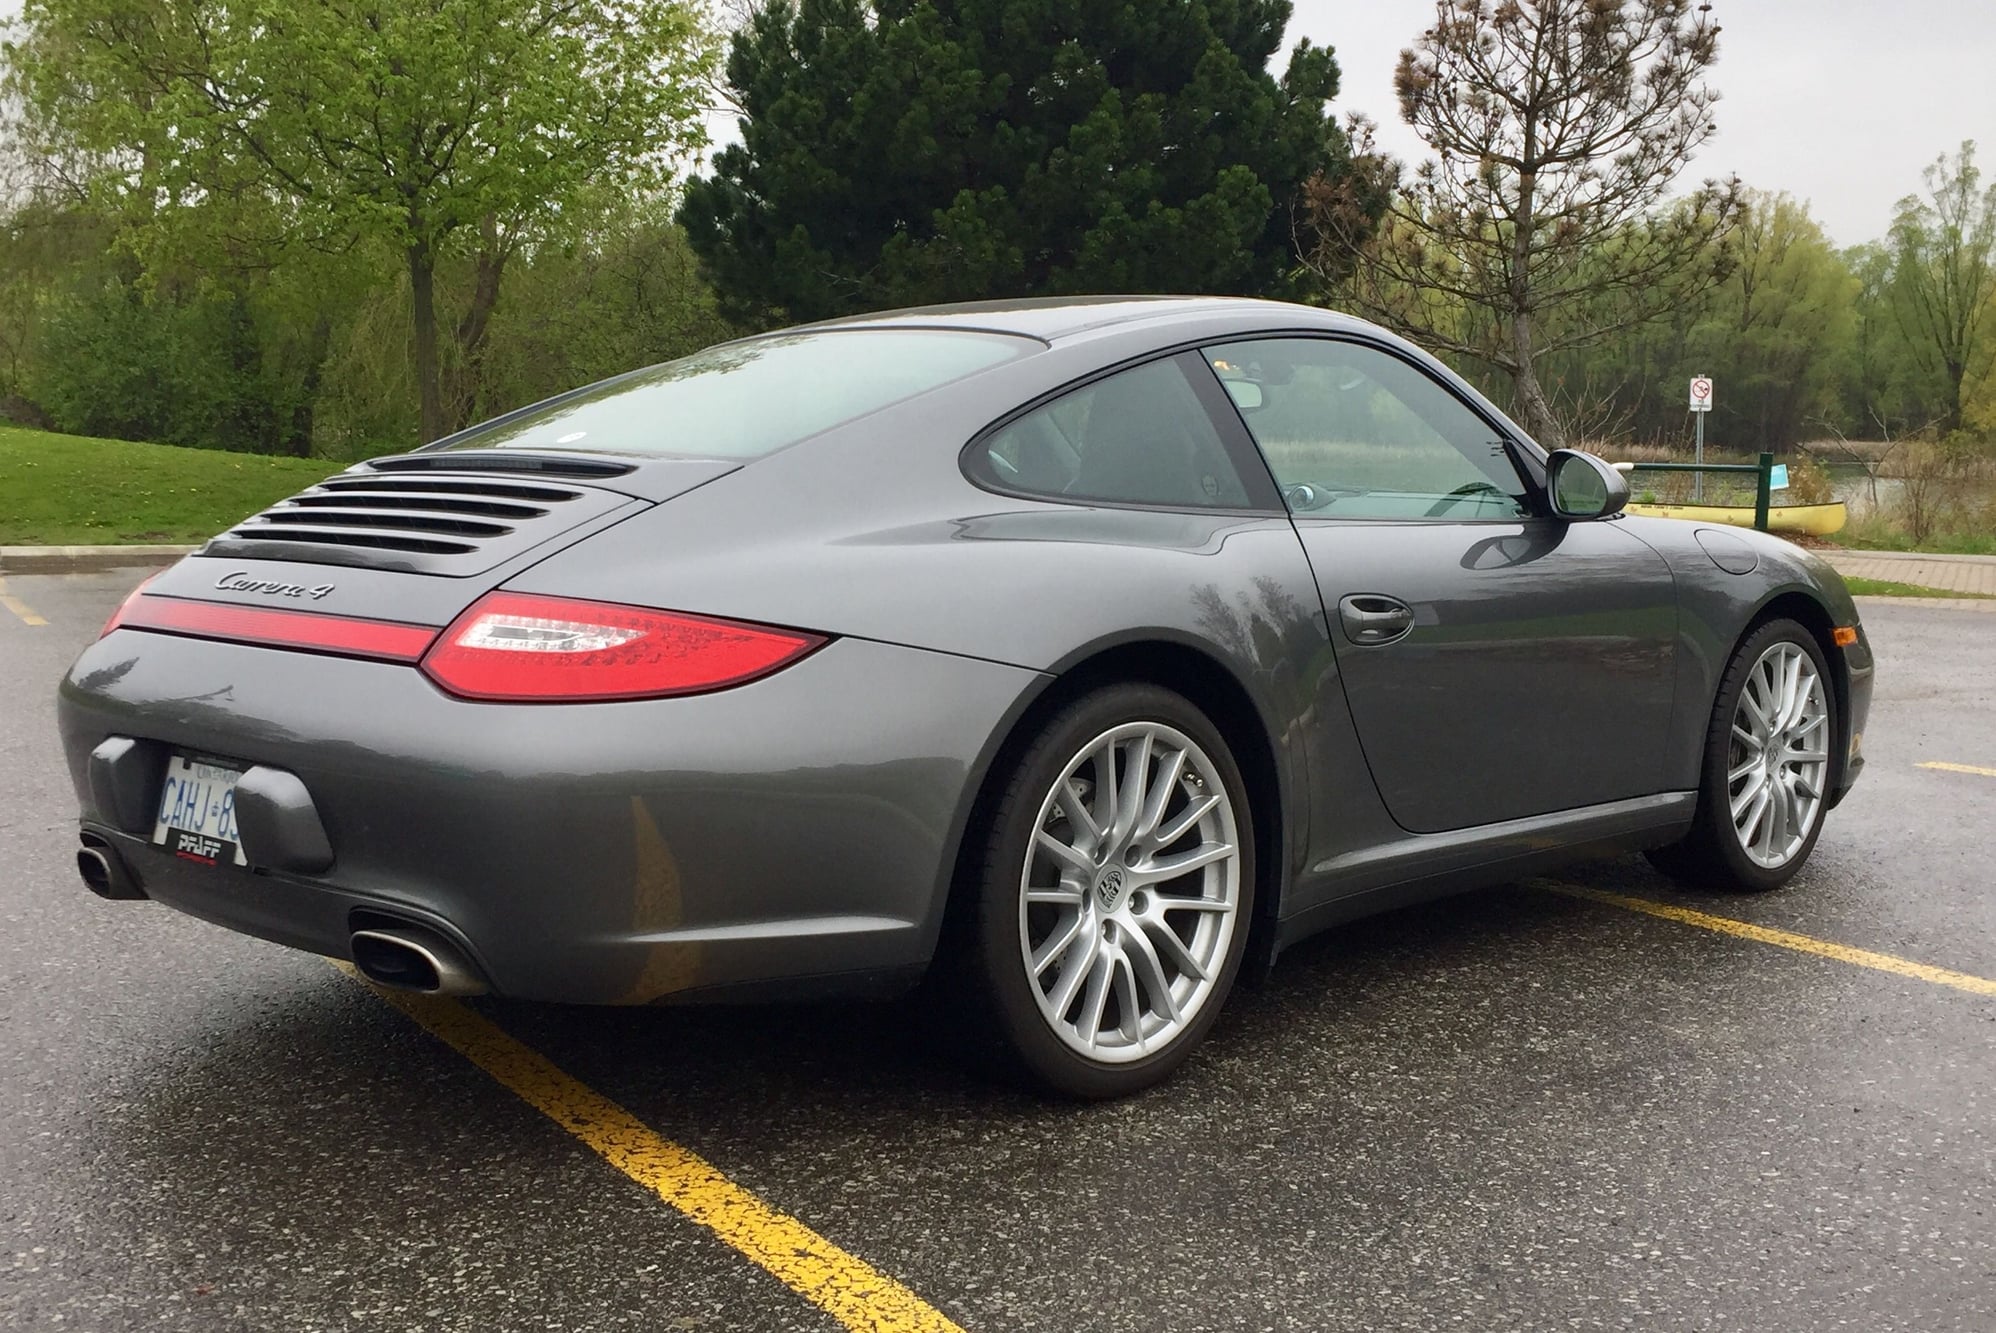 2009 Porsche 911 - 2009 Porsche 911 Carrera 4 - Meteor Grey on Black, PDK, Extremely well maintained - Used - VIN WP0AA29929S707407 - 67,108 Miles - 6 cyl - AWD - Automatic - Coupe - Gray - Toronto, ON M4C5L2, Canada